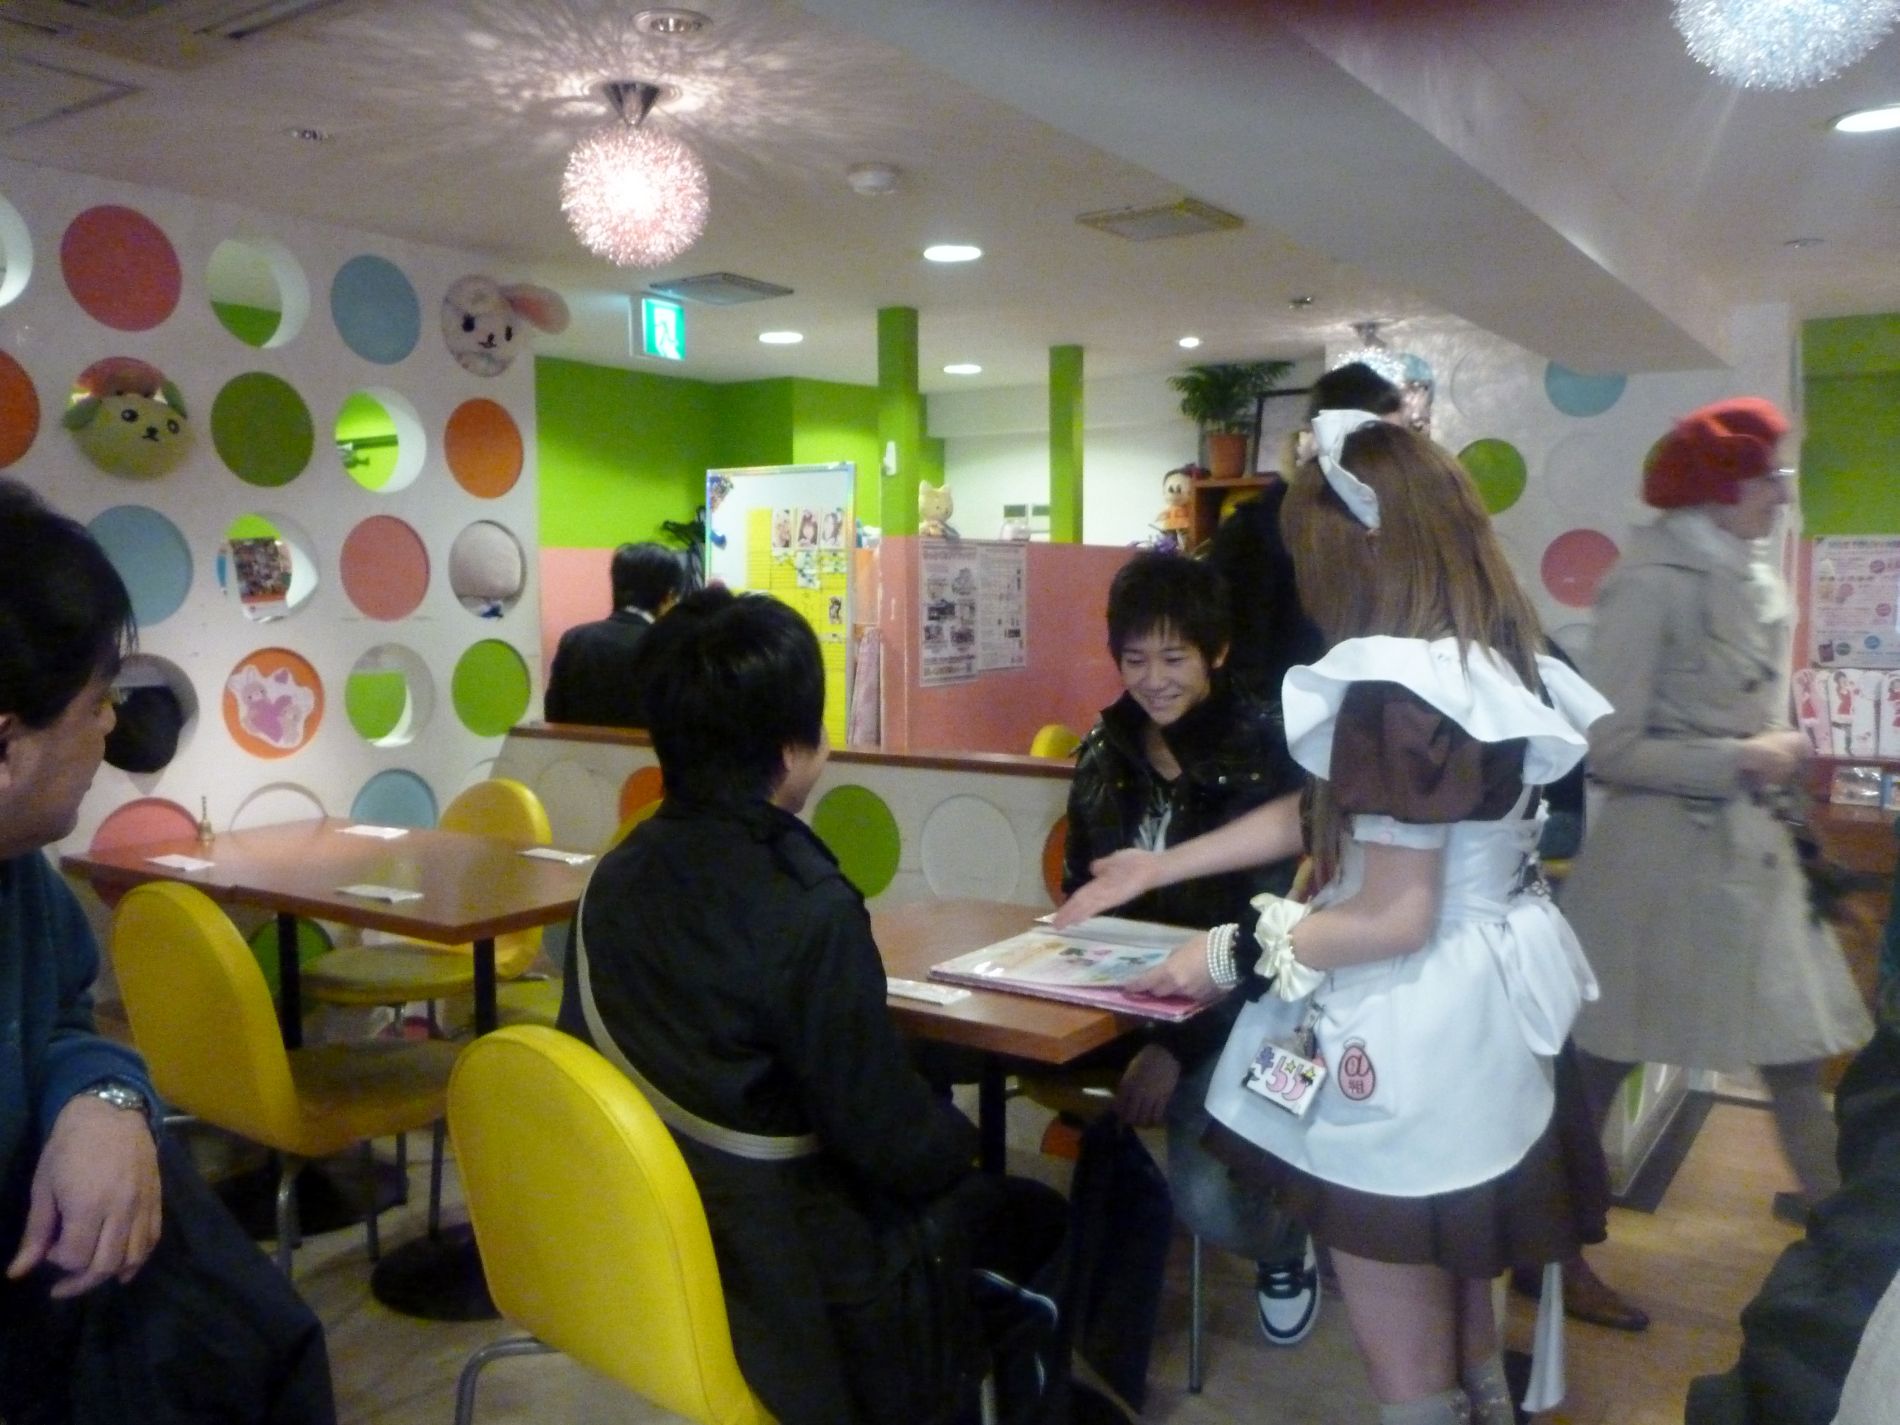 A Japanese girl dressed as a maid waits on boys in a maid cafe in Akihabara, Tokyo, Japan.